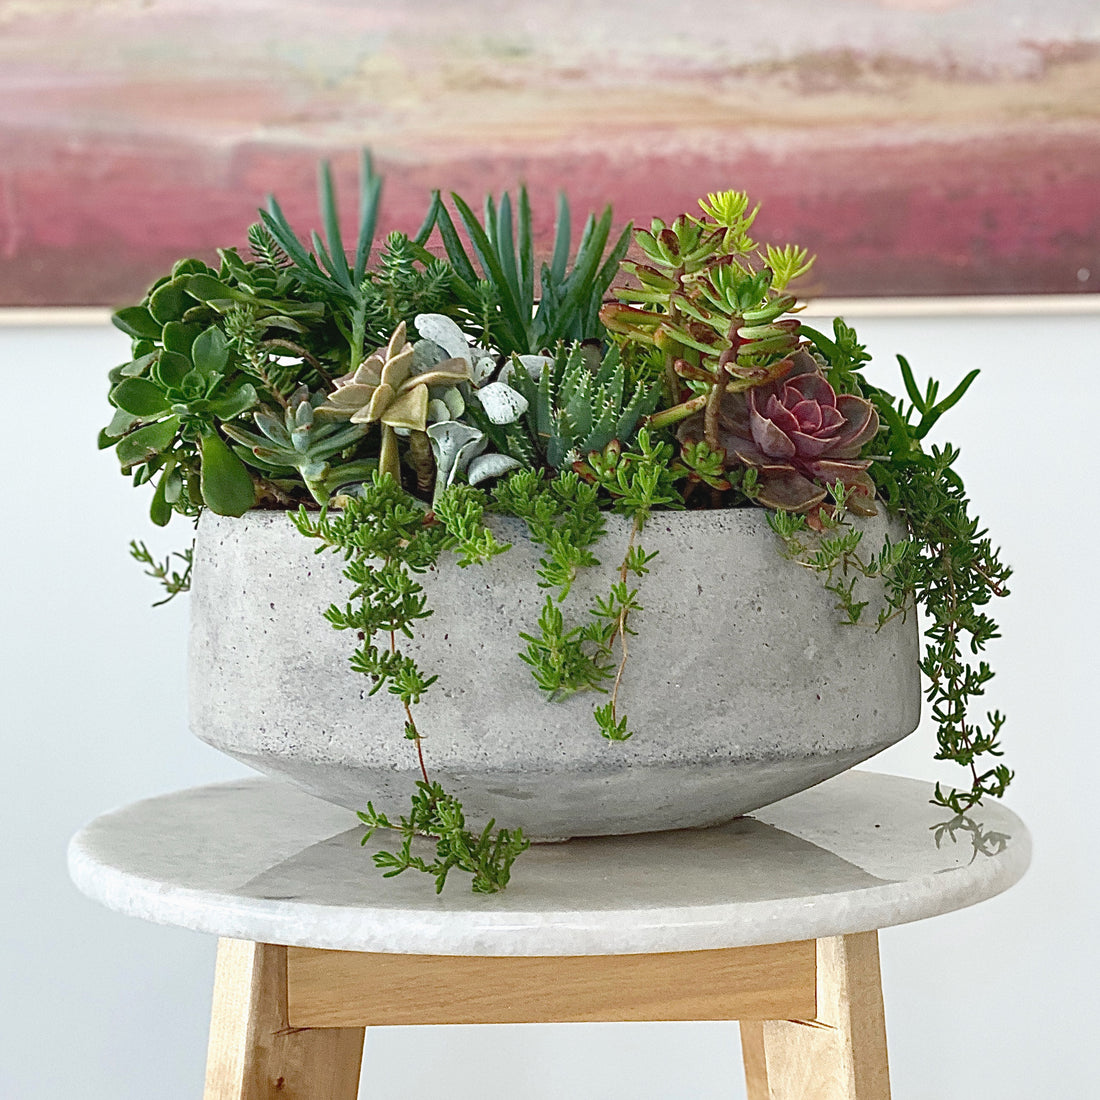 How to care for your Succulent Bowl